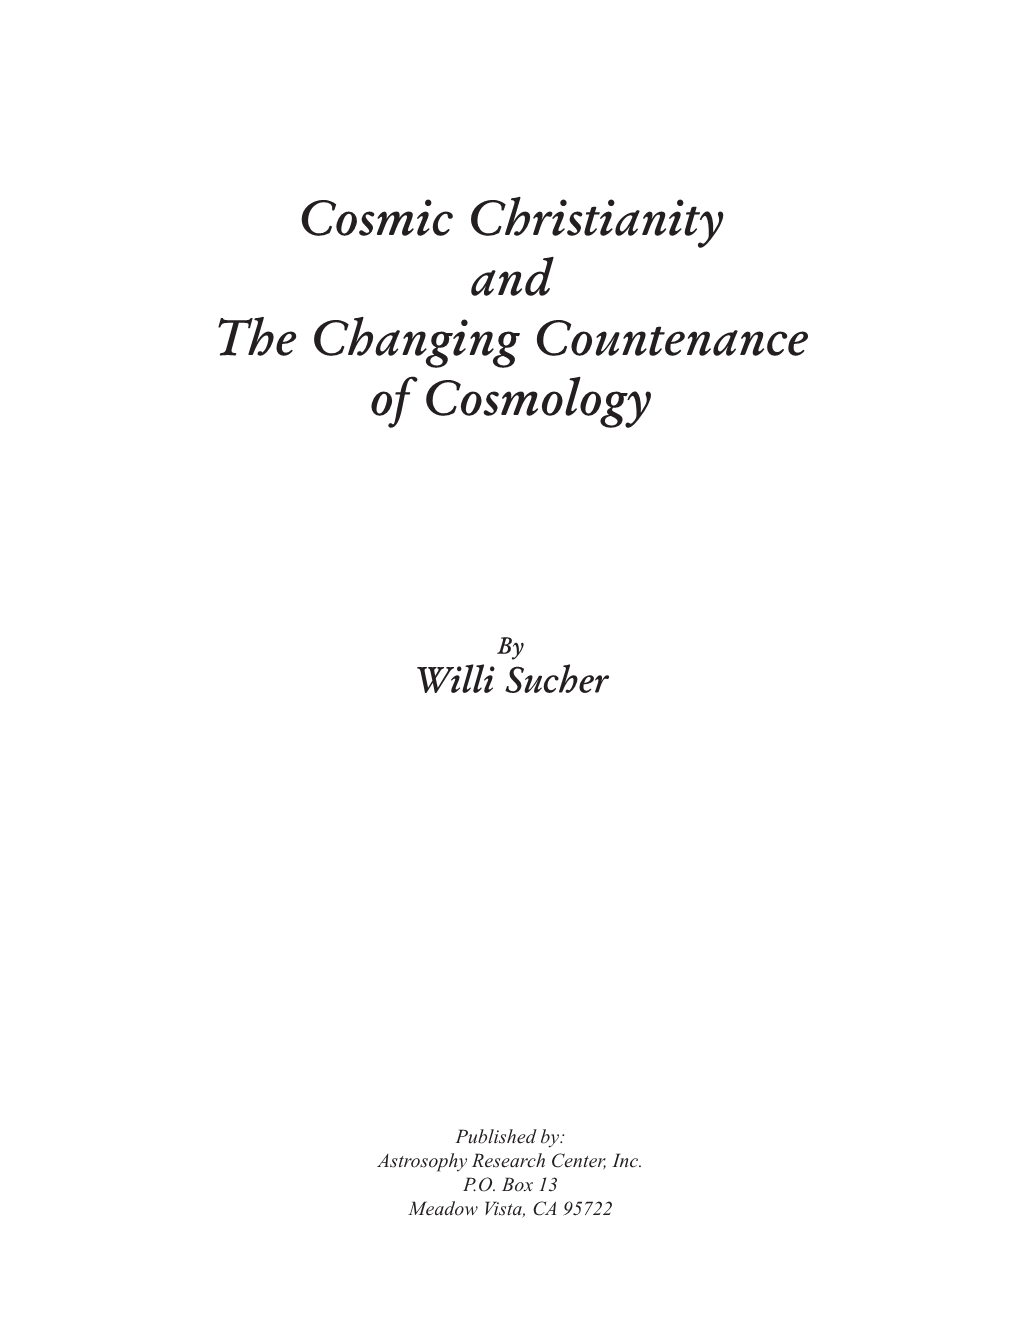 Cosmic Christianity and the Changing Countenance of Cosmology